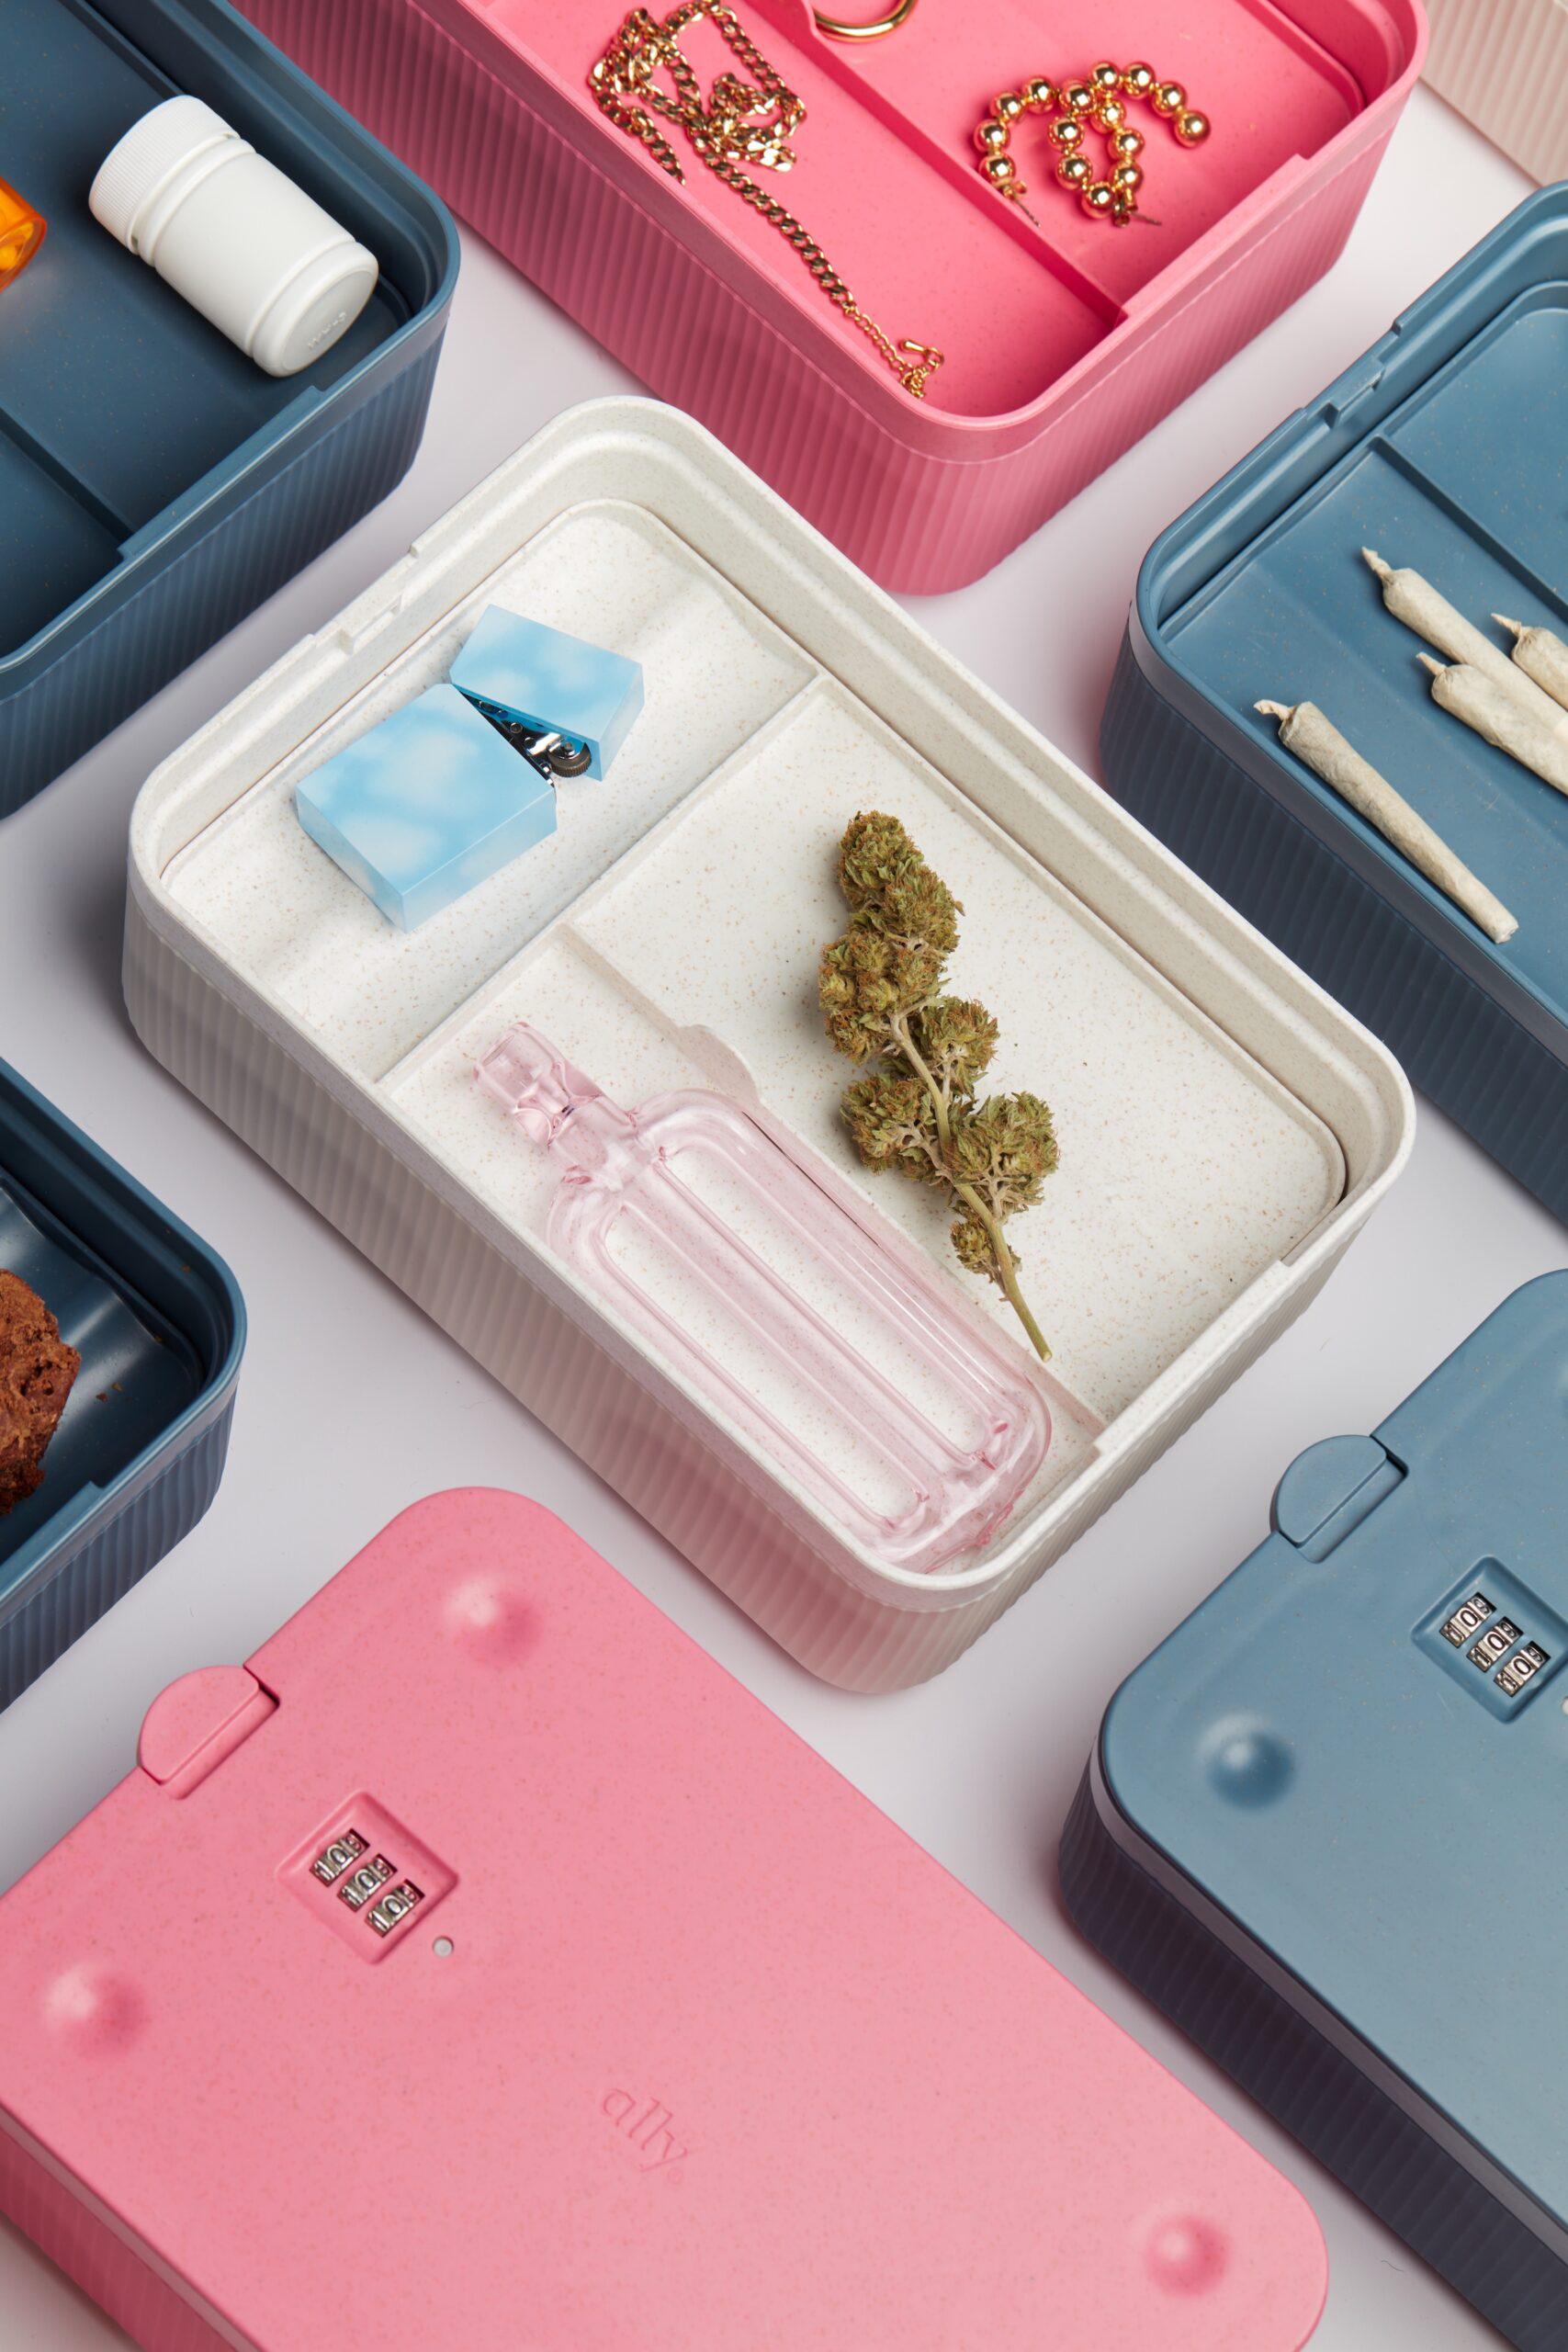 The best cannabis accessories from Canadian brands